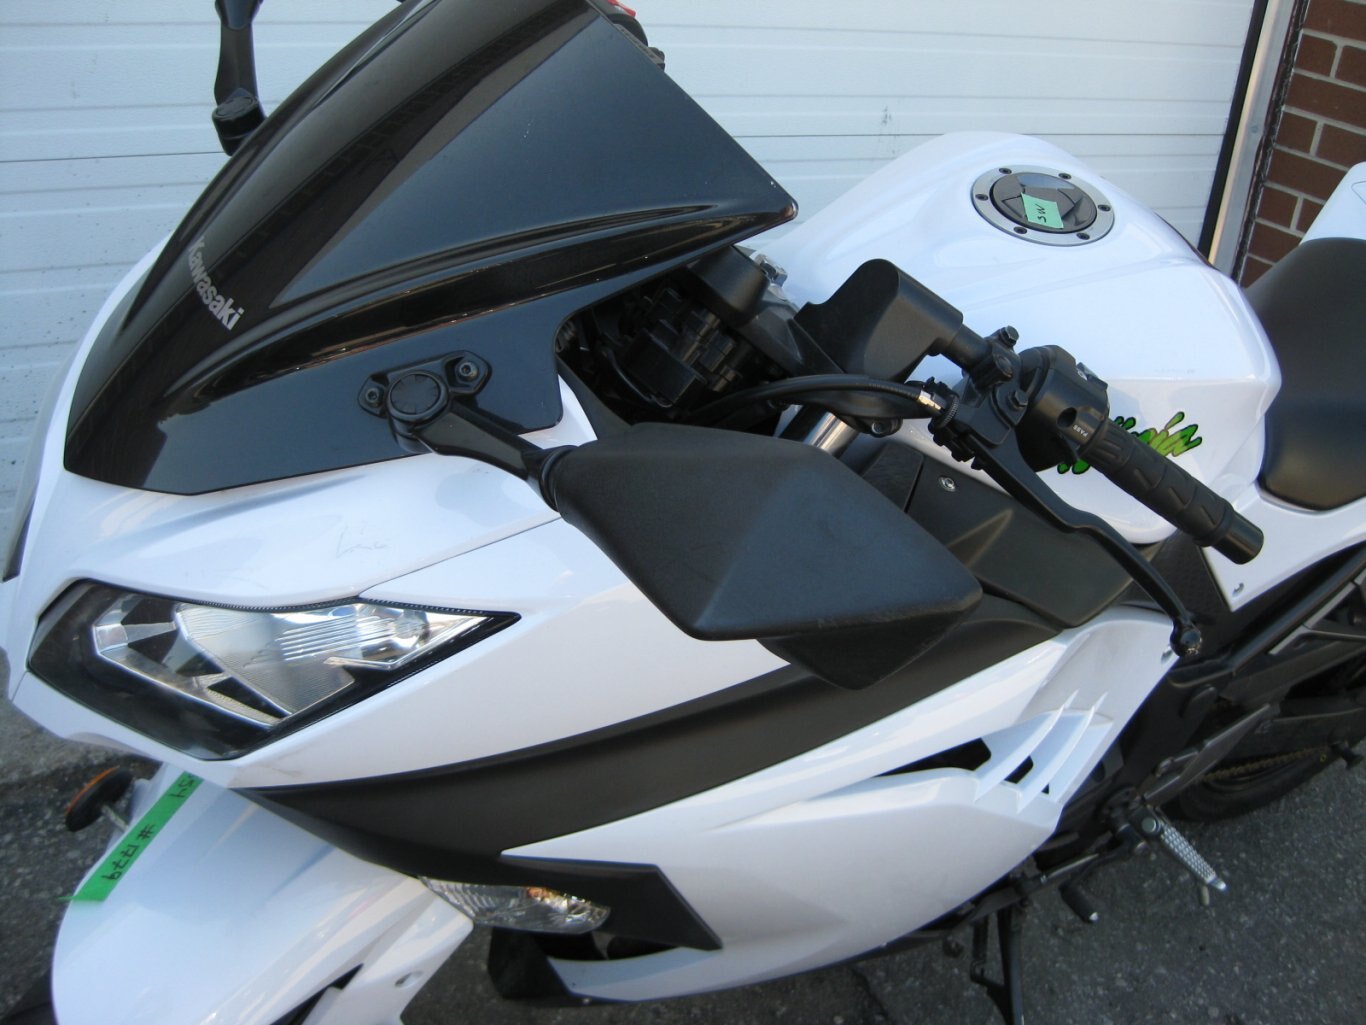 2015 Kawasaki Ninja 300R SOLD CONGRATULATIONS JASON, WELCOME TO THE WORLD OF TWO WHEELED EXCITEMENT!